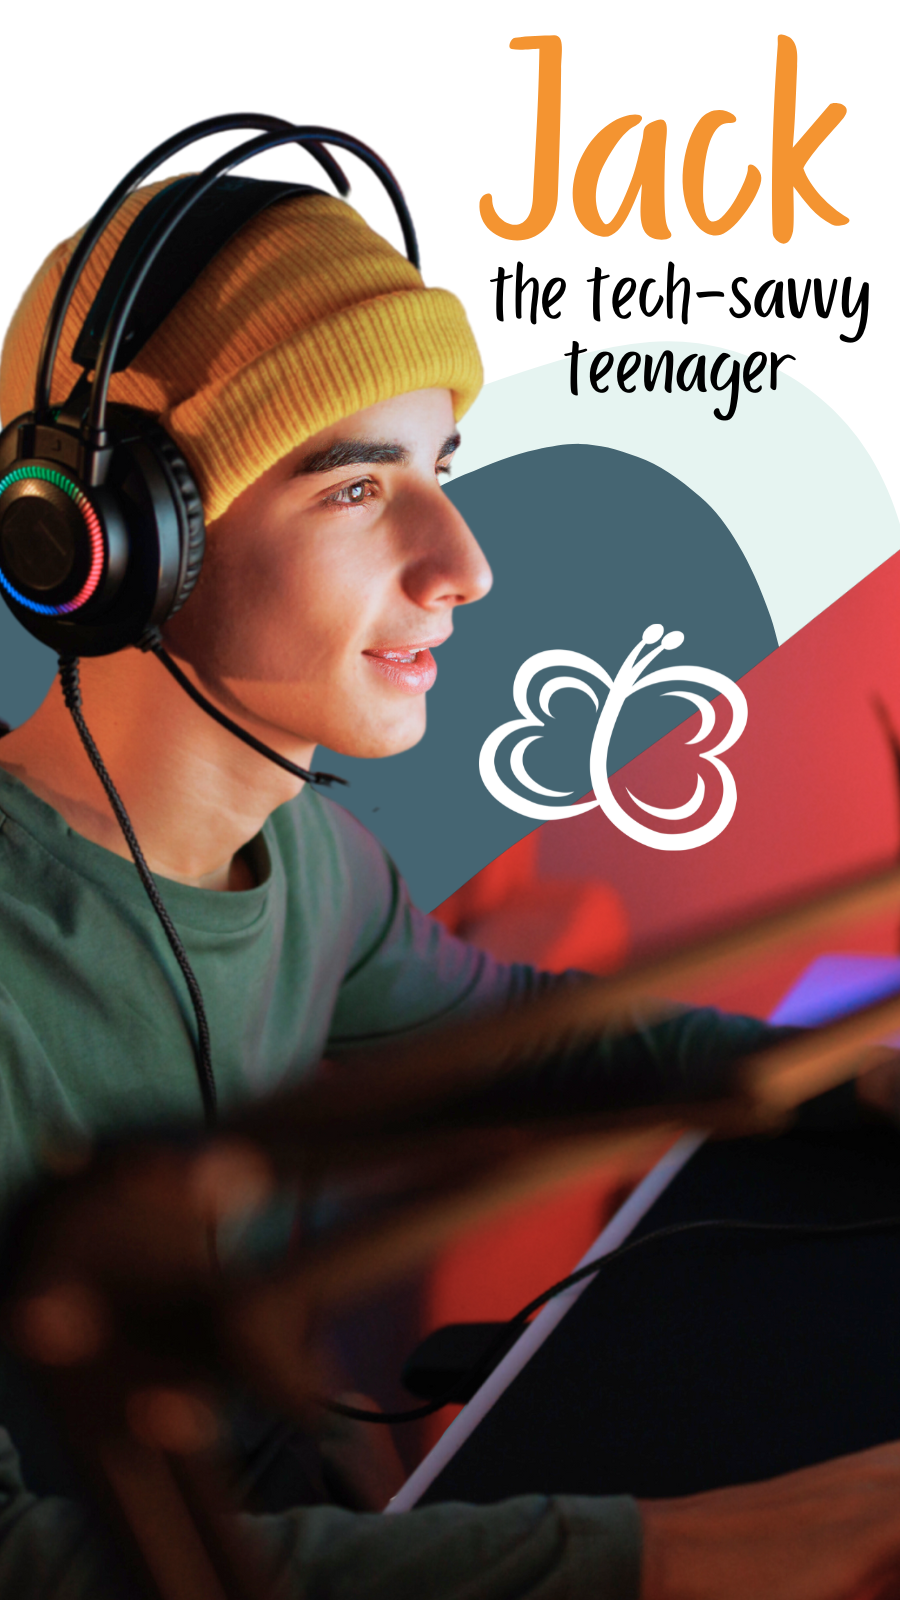 Photo of teenager playing video games while using a head phone